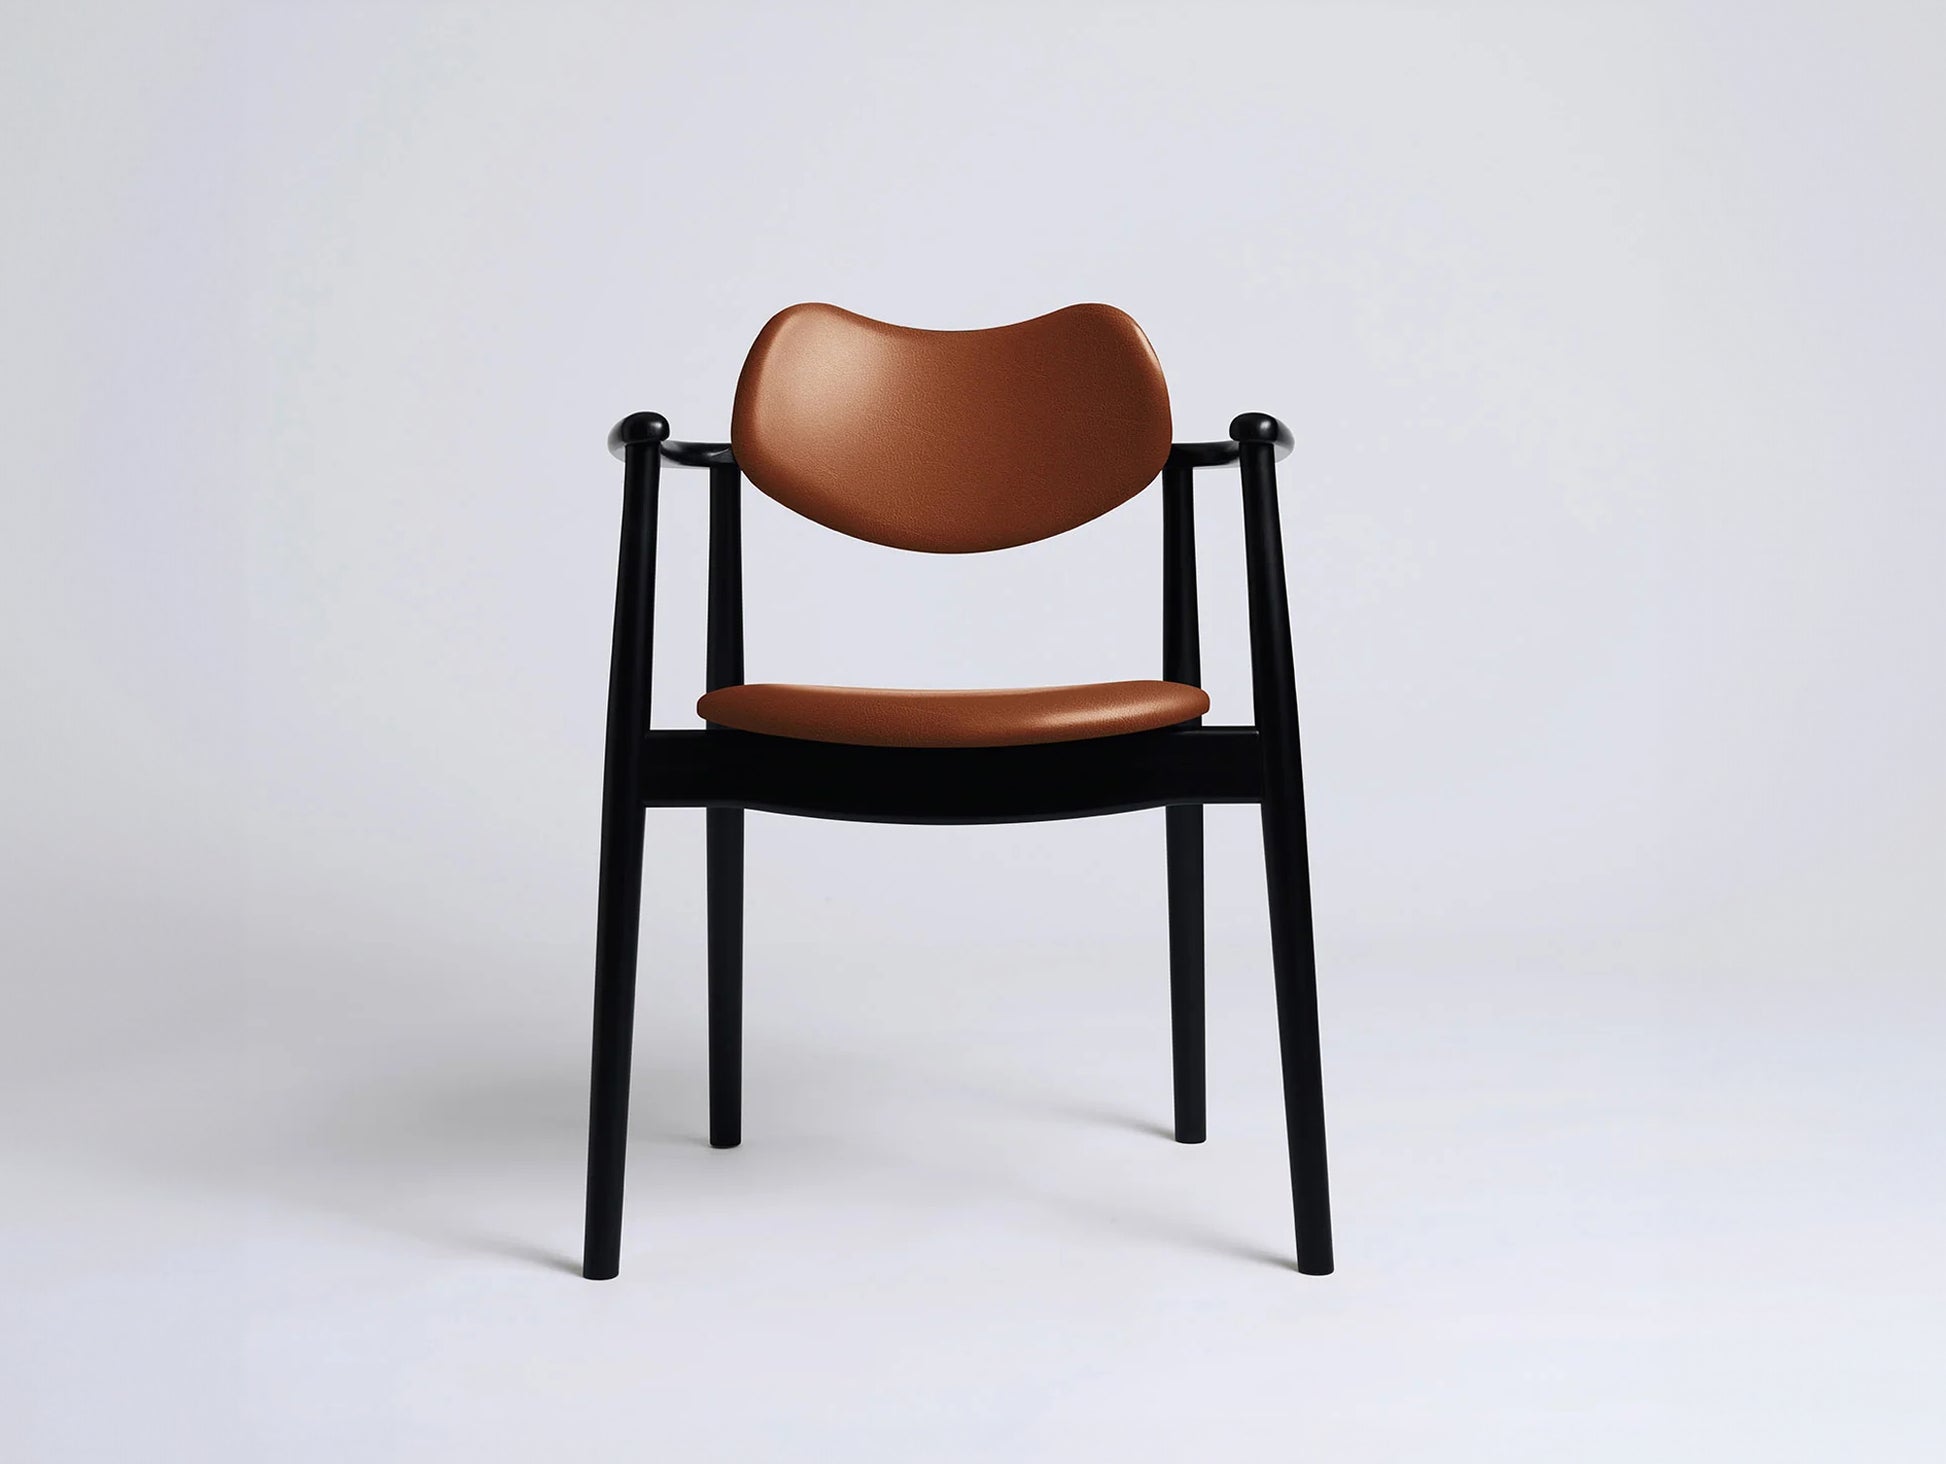 Regatta Chair Seat and Back Upholstered by Ro Collection - Black Lacquered Beech / Exclusive Rio Cognac Leather